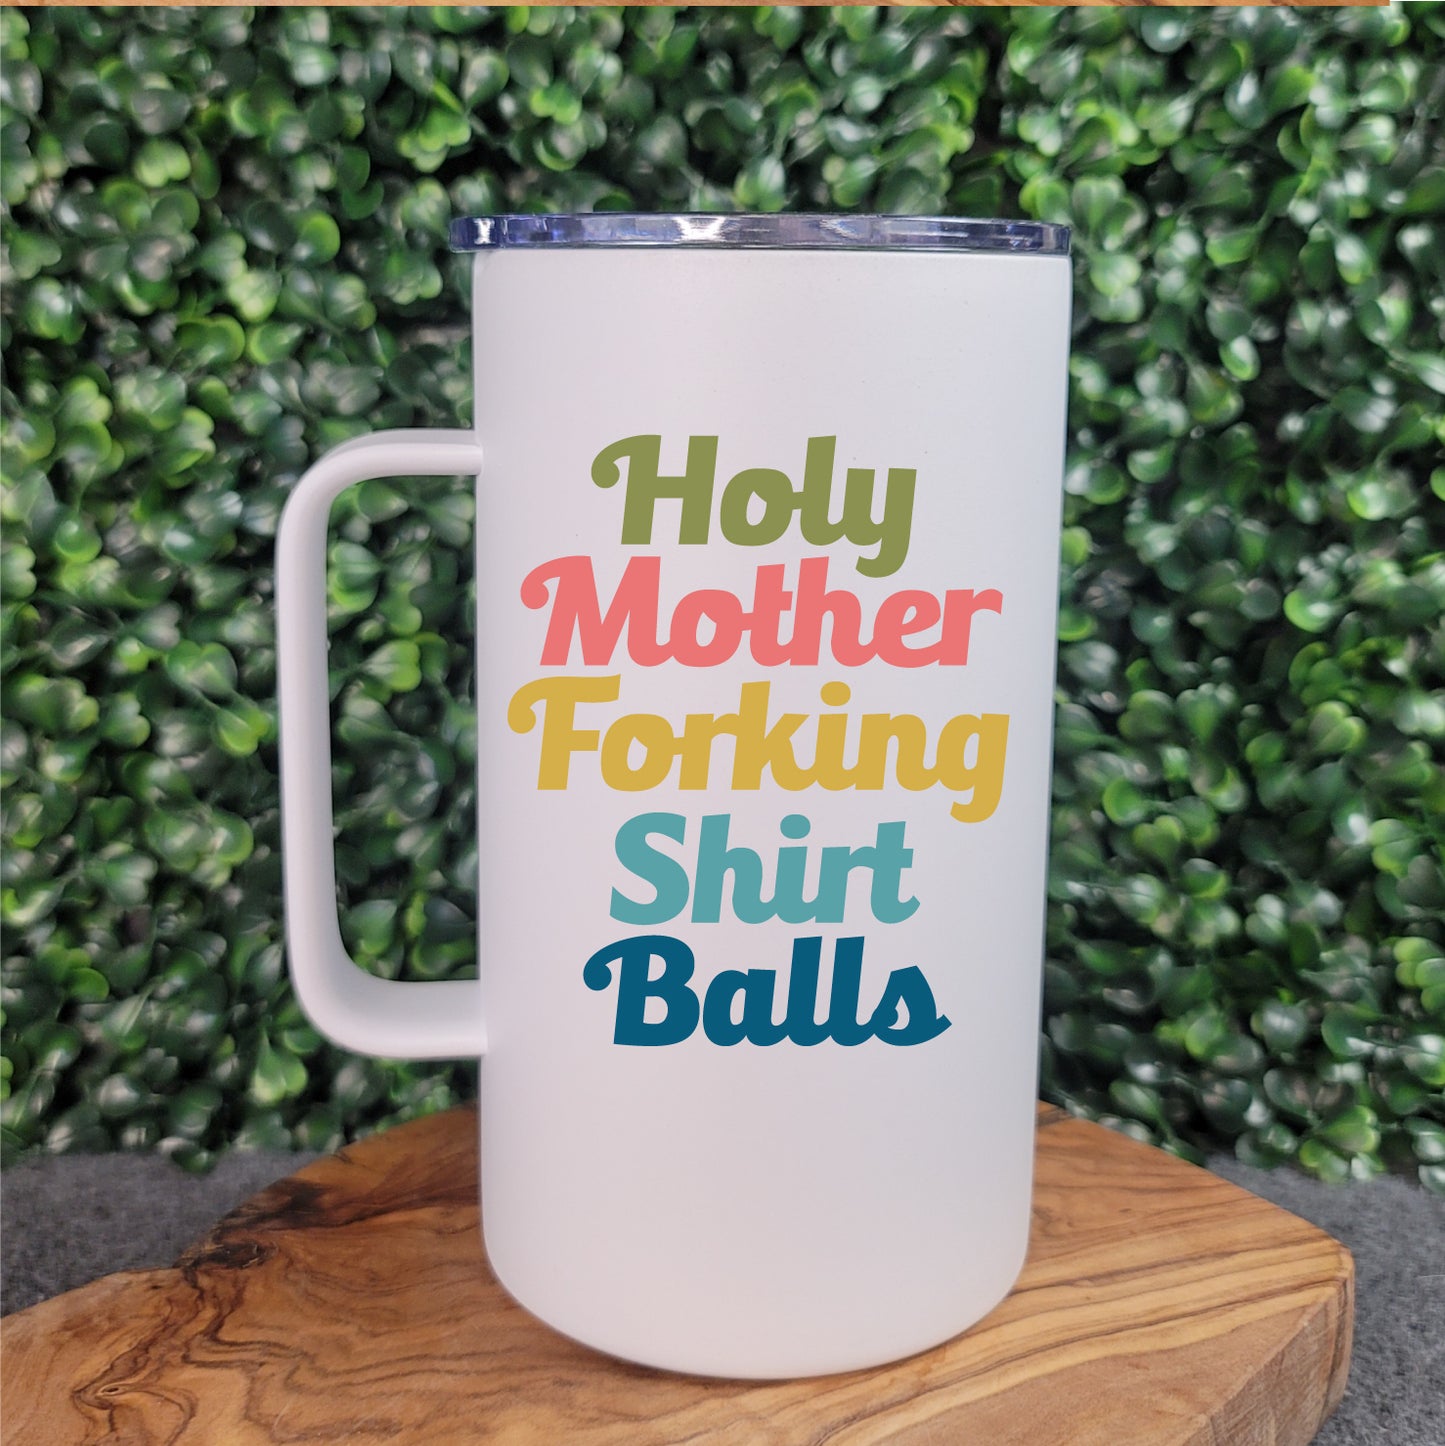 Holy Mother Forking Shirt Balls Roadie